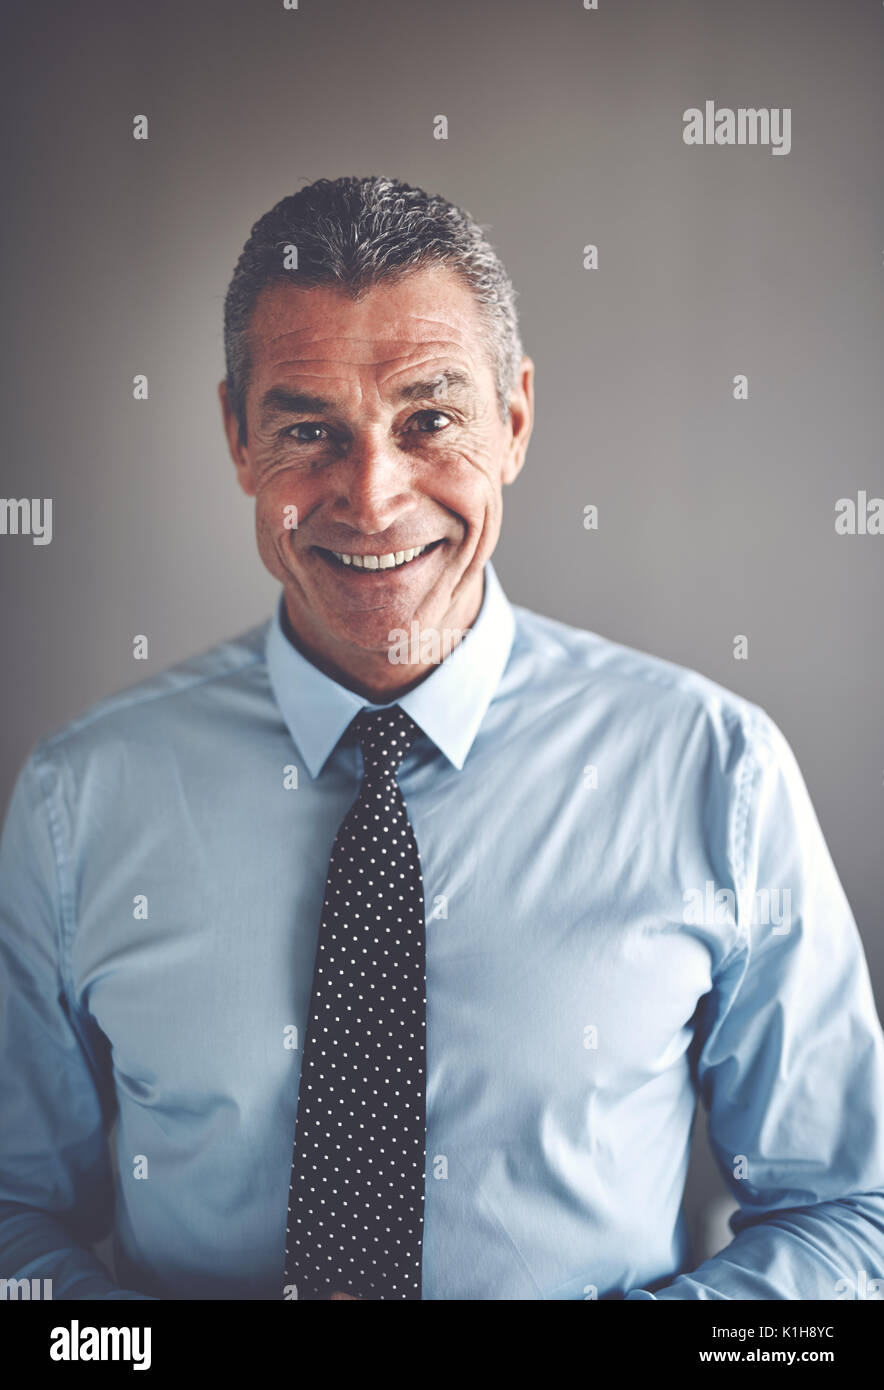 Portrait of a handsome mature businessman wearing a shirt and tie smiling and standing confidently alone in an office Stock Photo